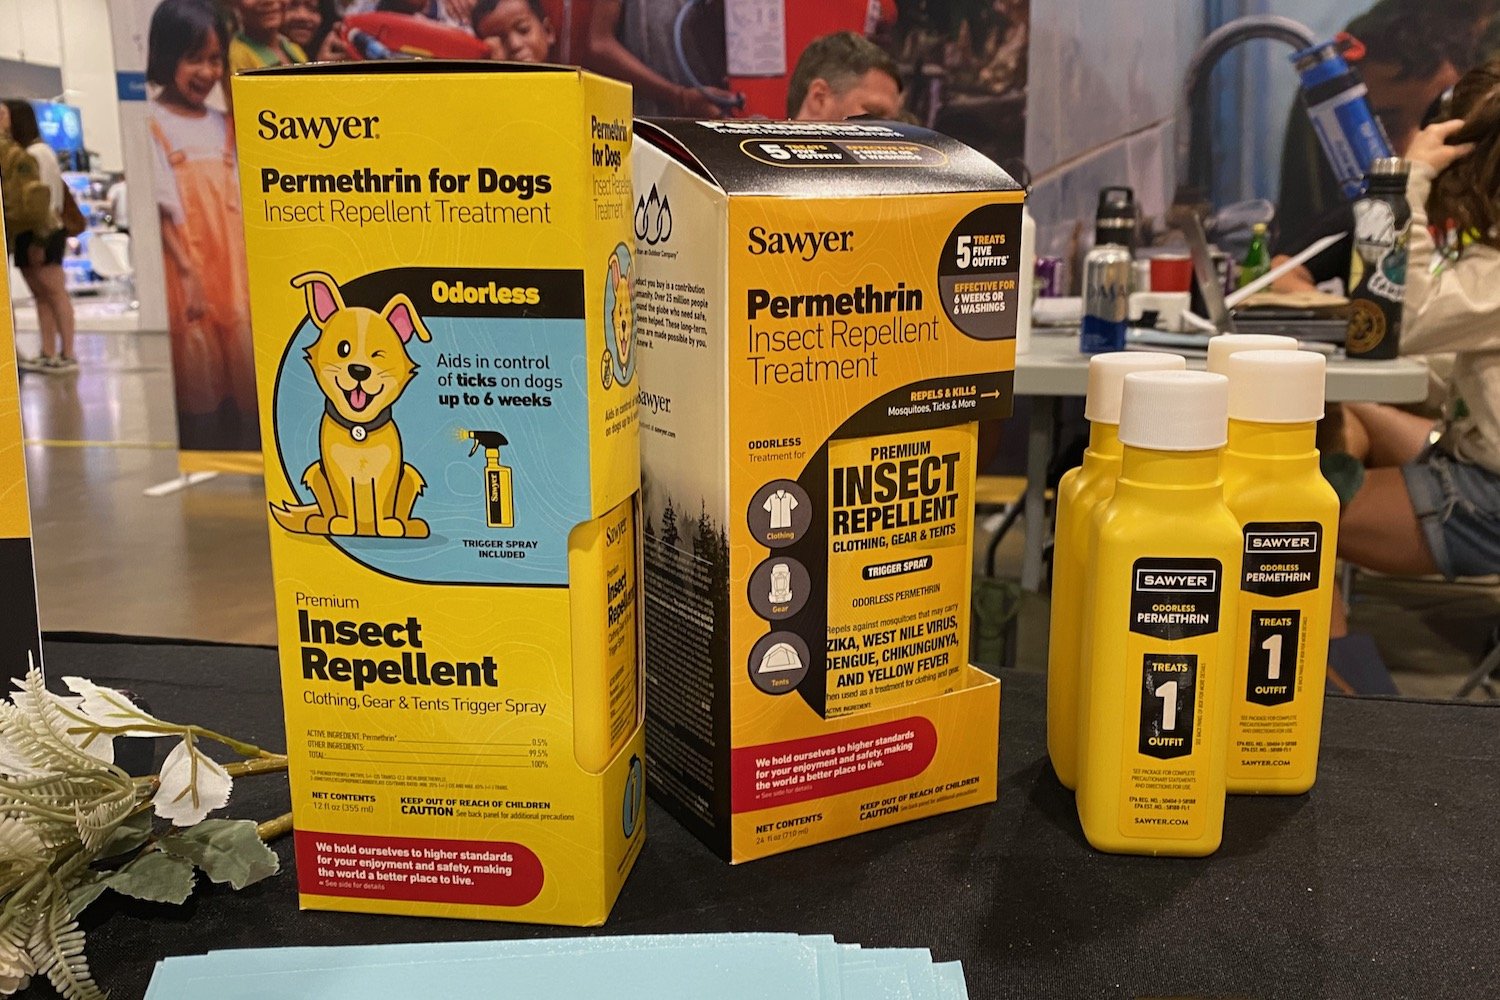 Bottles of Permethrin and Permethrin for Dogs sitting on a table